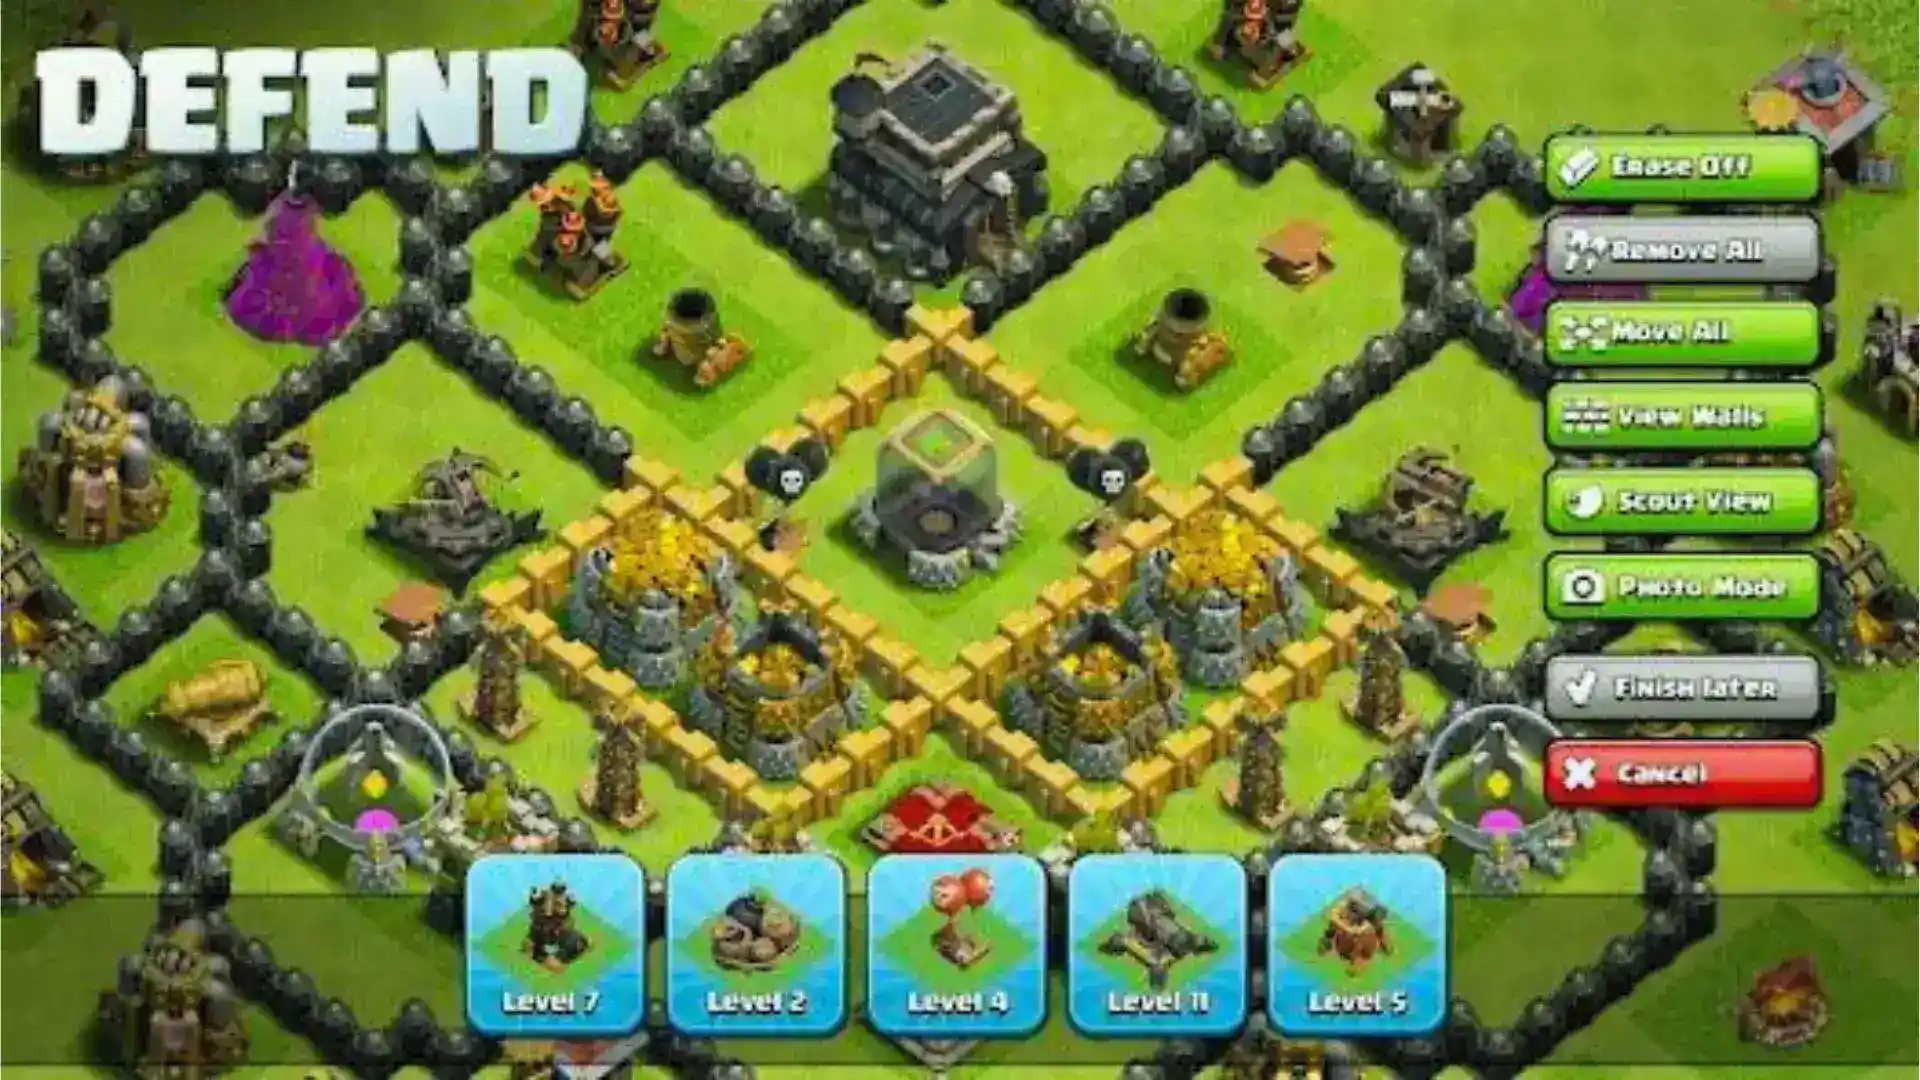 Defend in Clash of Clans